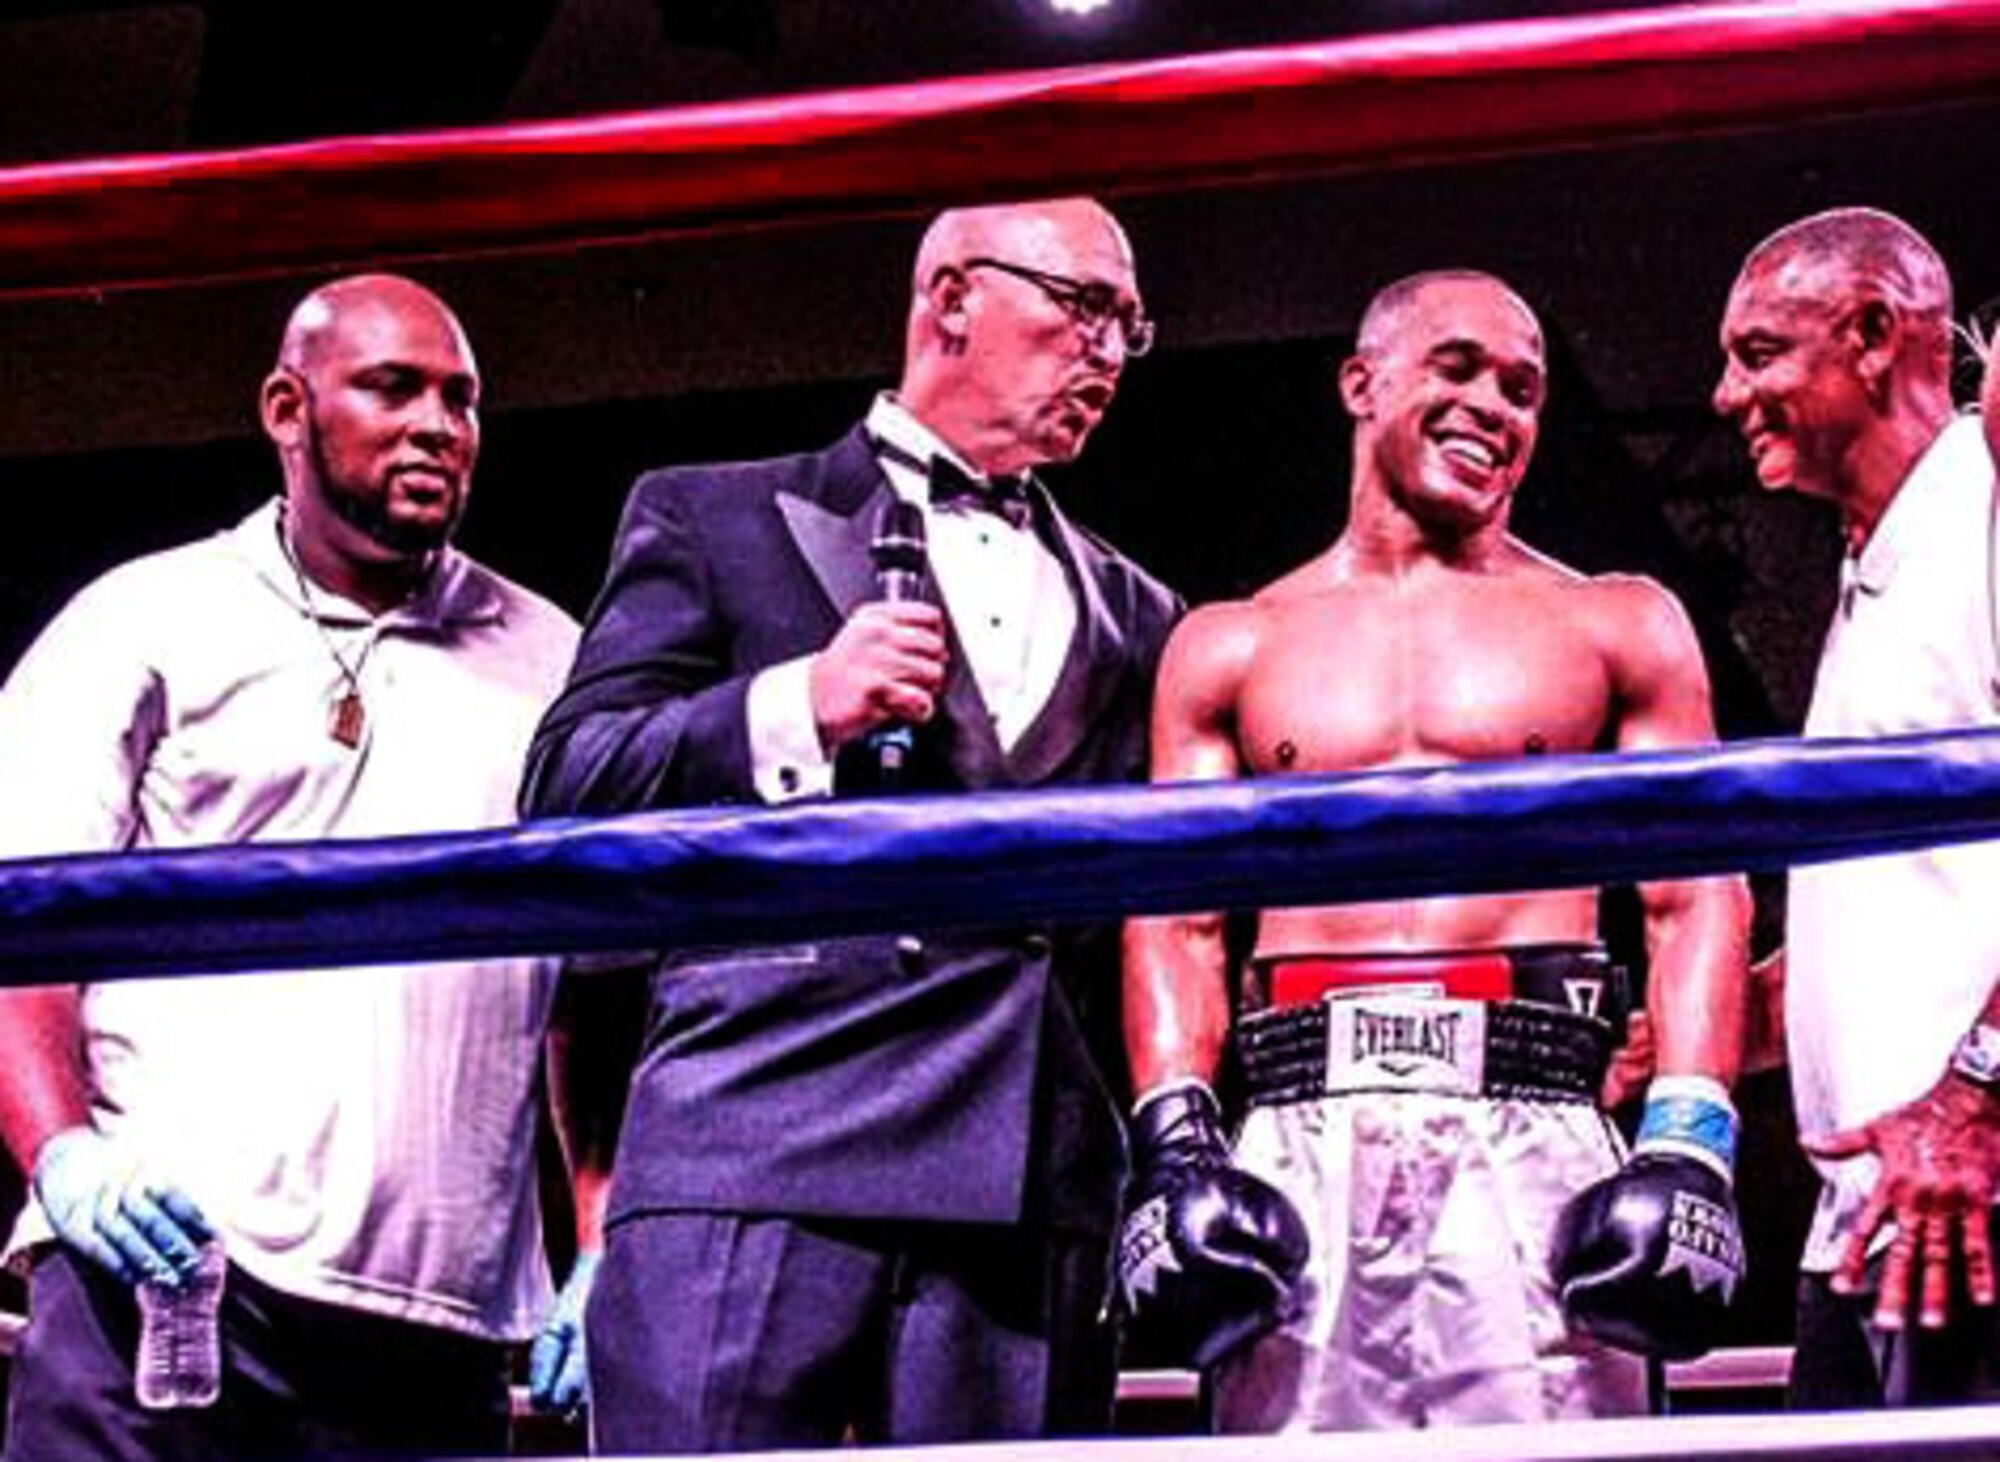 U.S. Air Force Tech. Sgt. Andre Penn, 20th Civil Engineer Squadron unaccompanied housing manager, center right, is congratulated following his boxing match win at the “Battle in the Panhandle,” in Fort Walton Beach, Florida, Nov. 18, 2017.